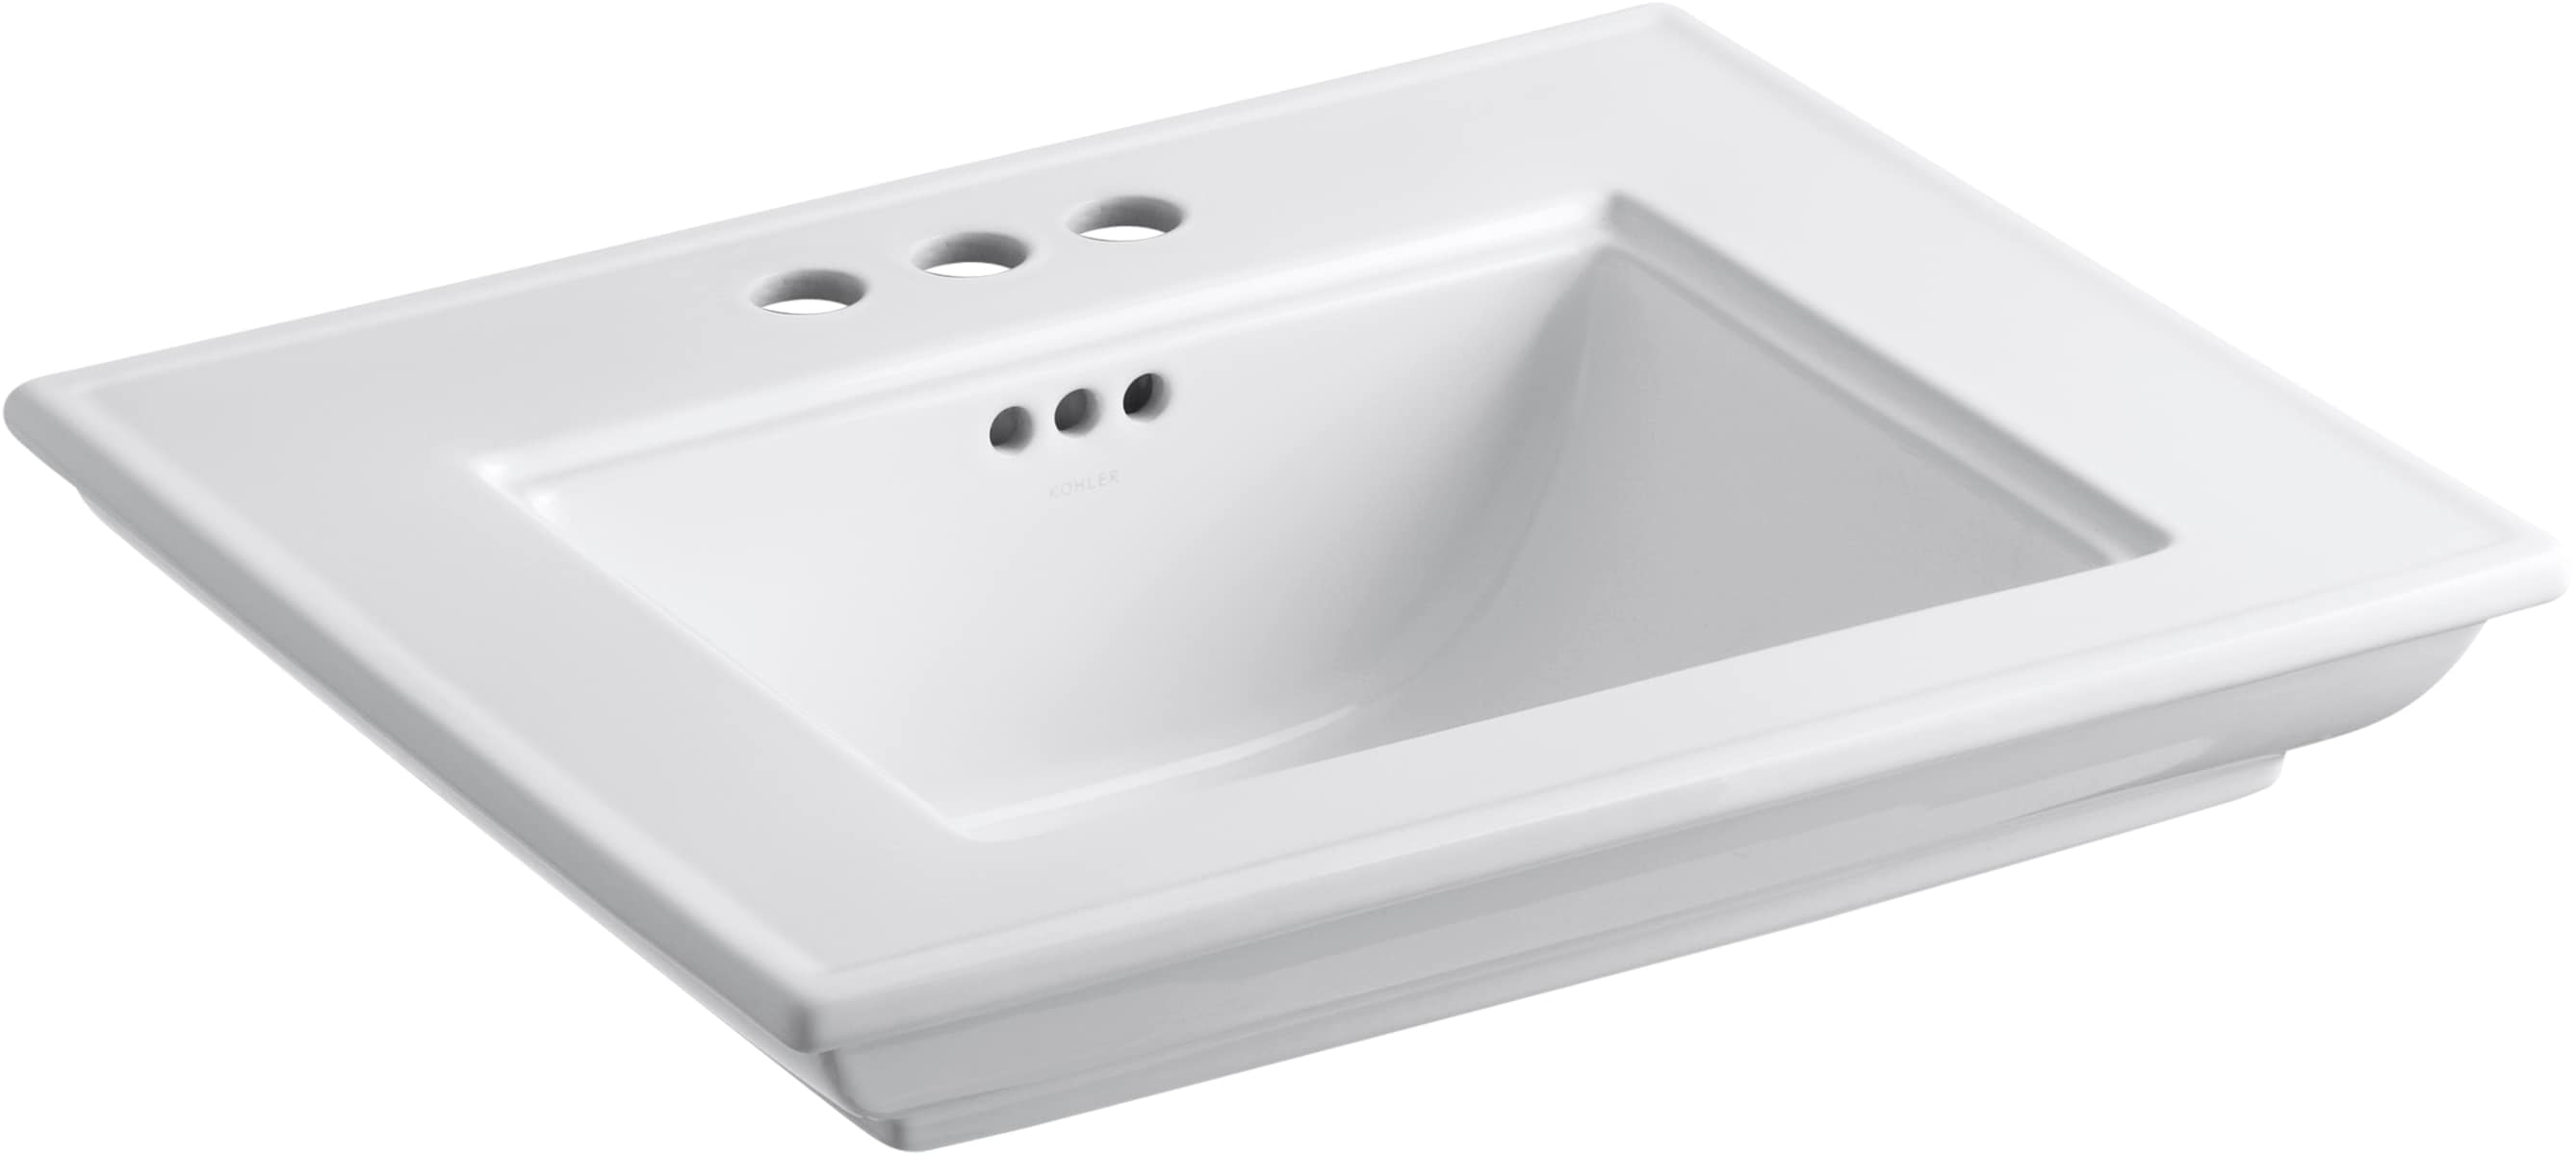 KOHLER Memoirs White Fireclay Wall-mount Traditional Console Sink 